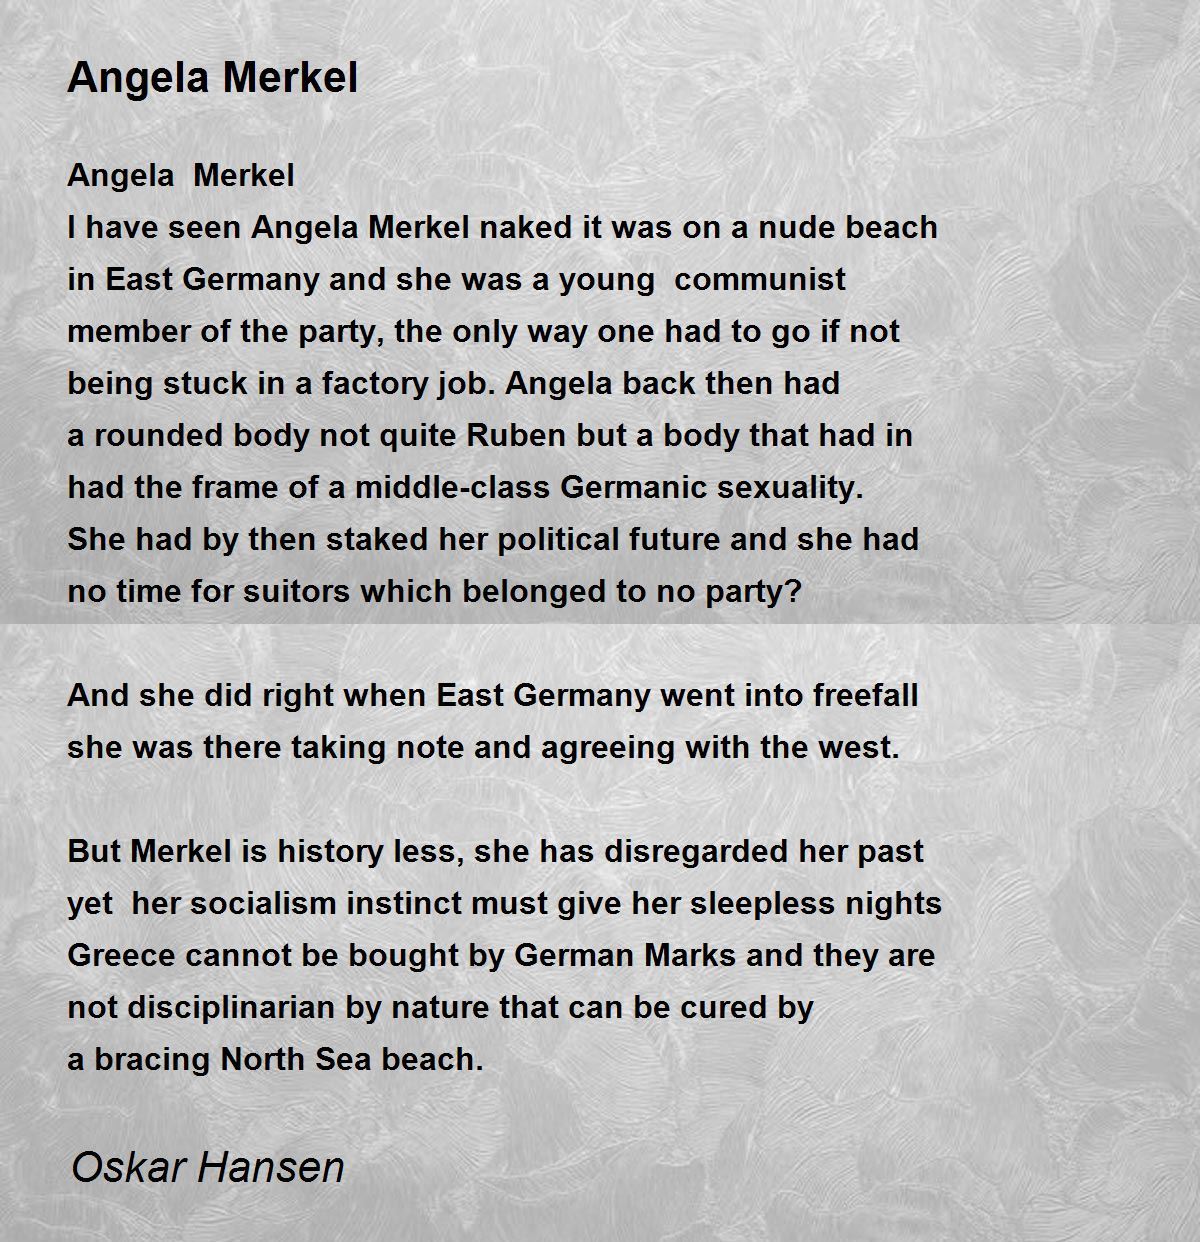 claire dick recommends Angela Merkel Nude Beach